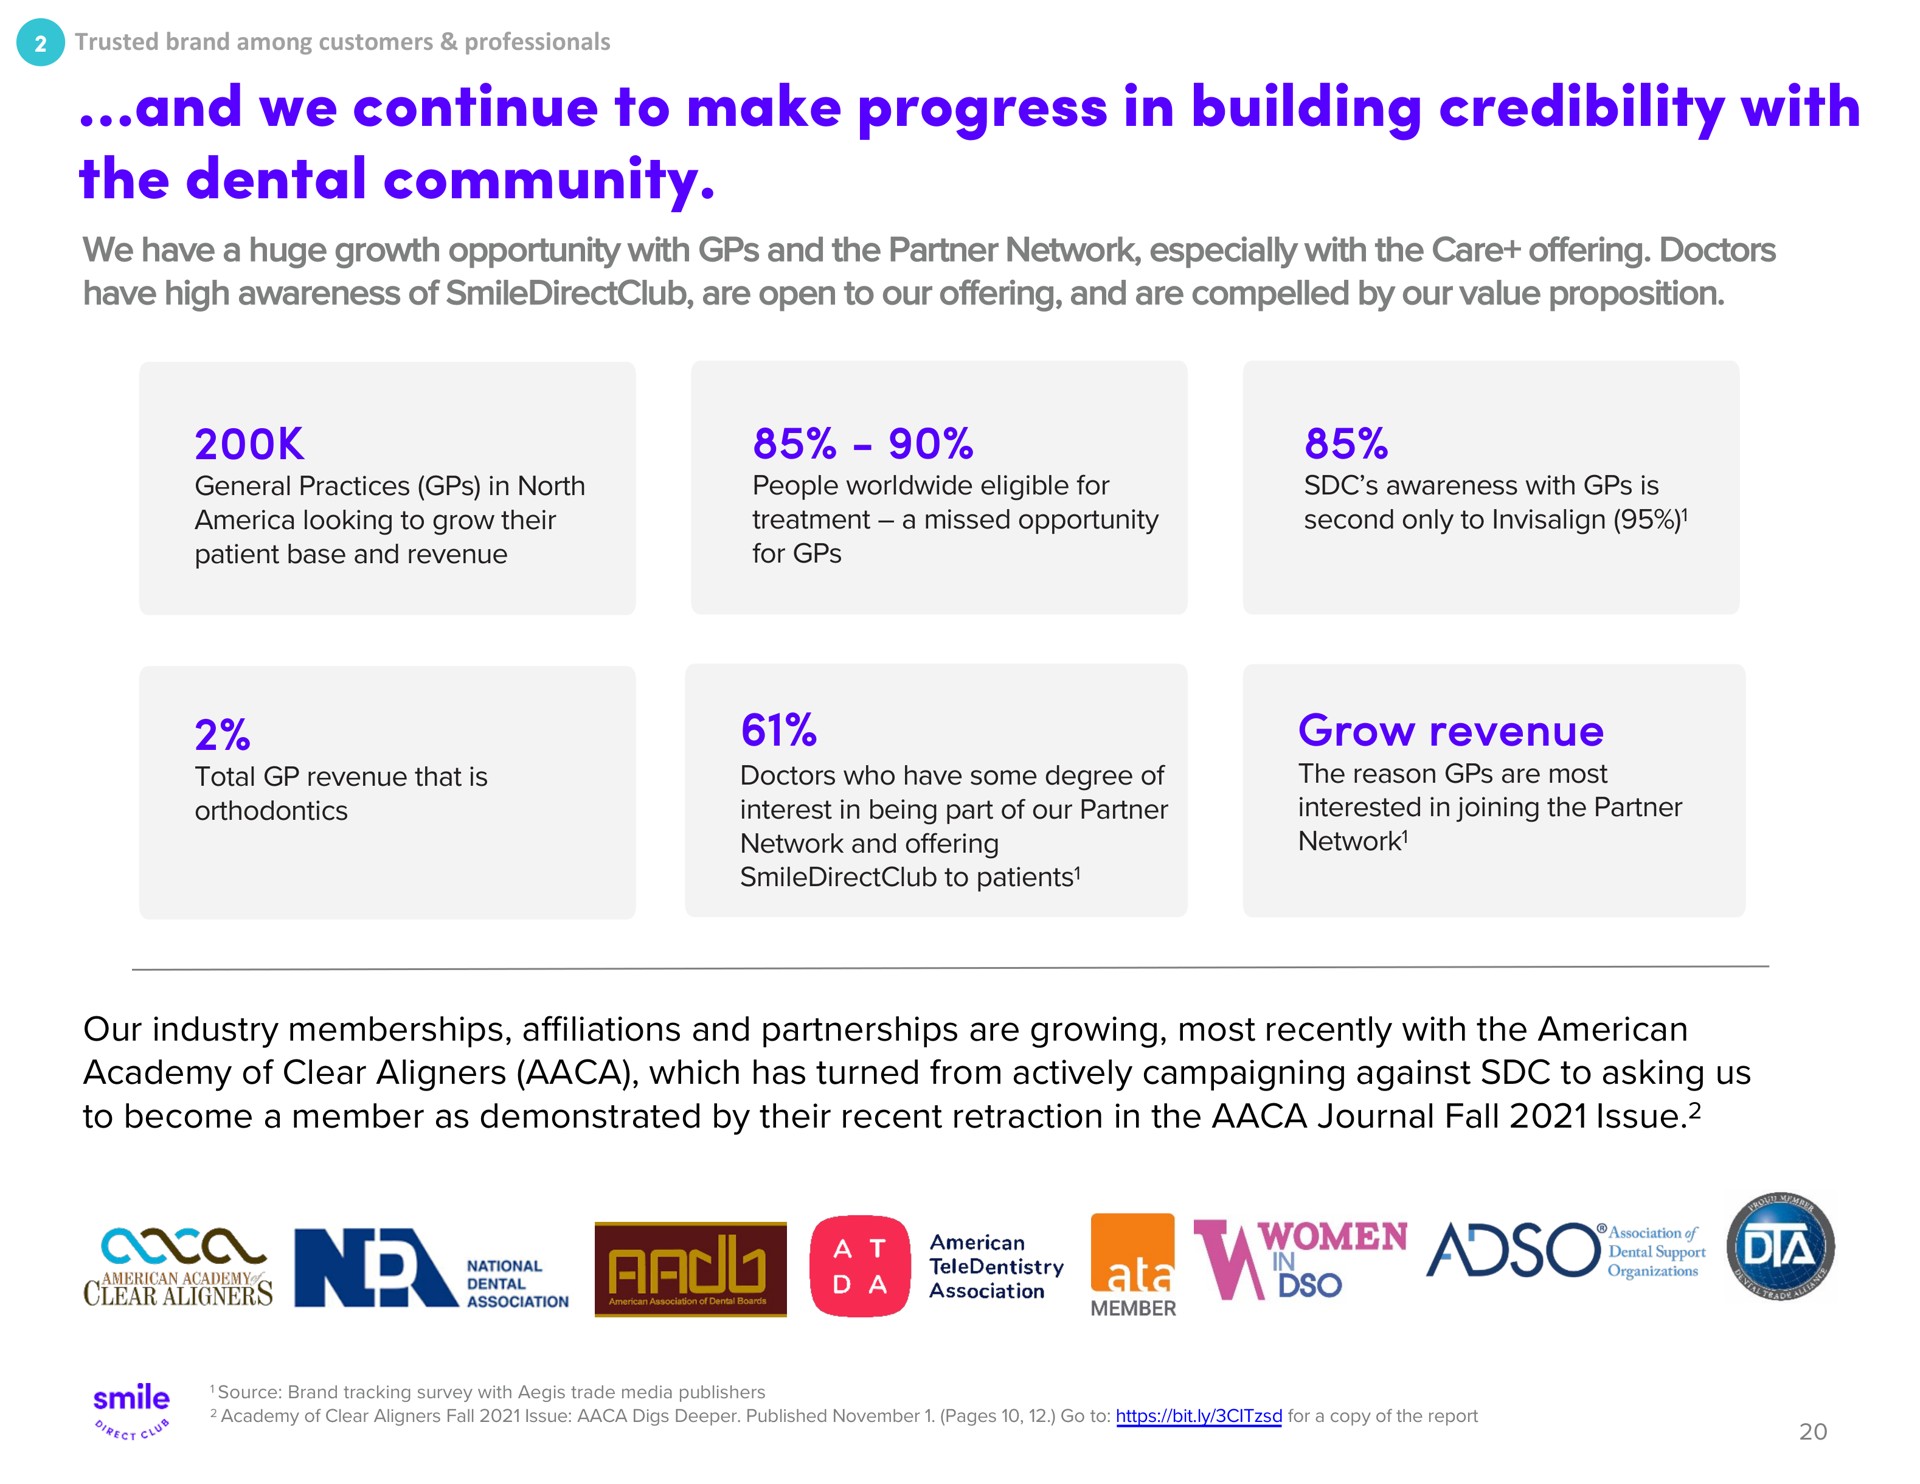 and we continue to make progress in building credibility with the dental community | SmileDirectClub